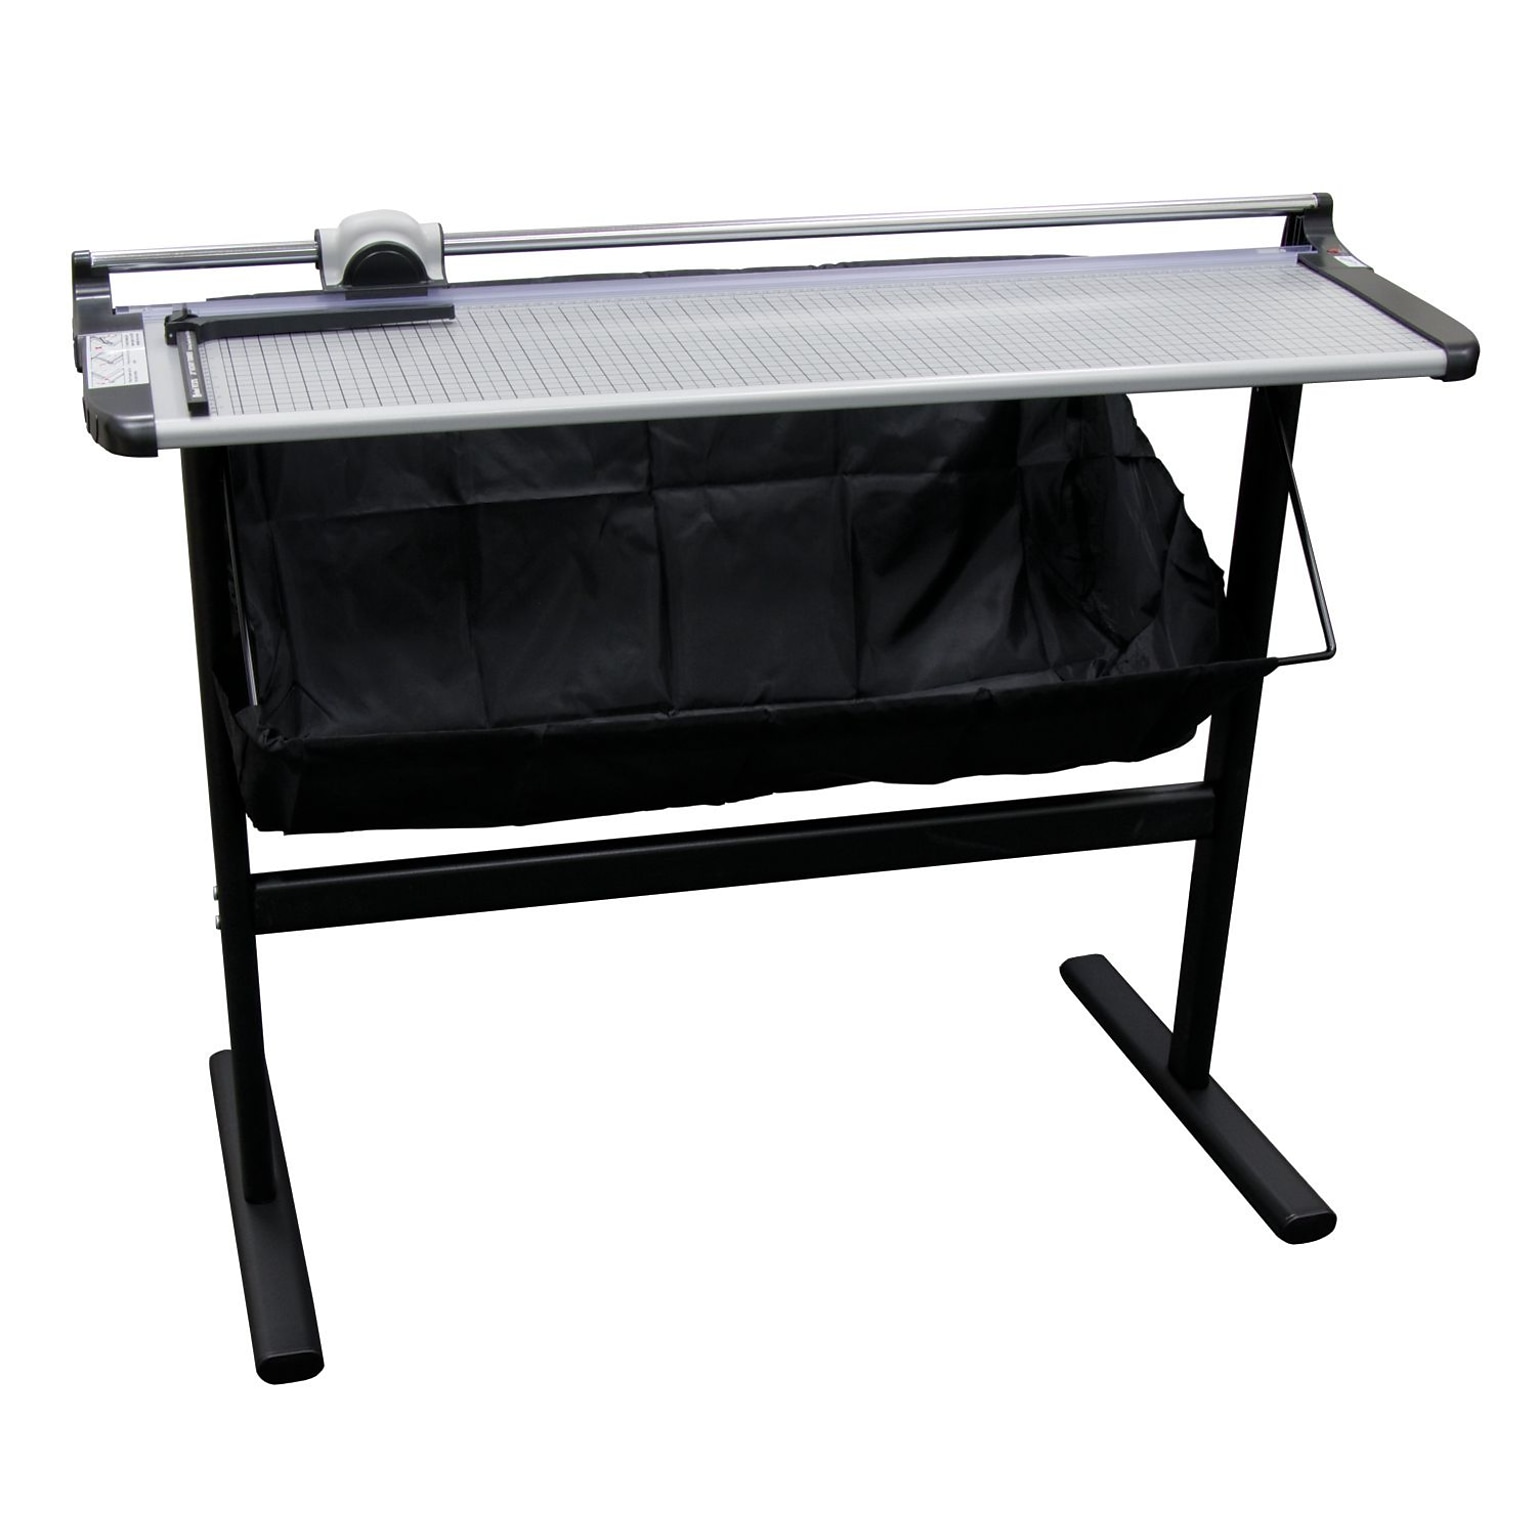 United 38 Rotary Paper Trimmer with Stand and Fabric Catch Tray, 10 Sheet Capacity, Silver/Black (RT37S)